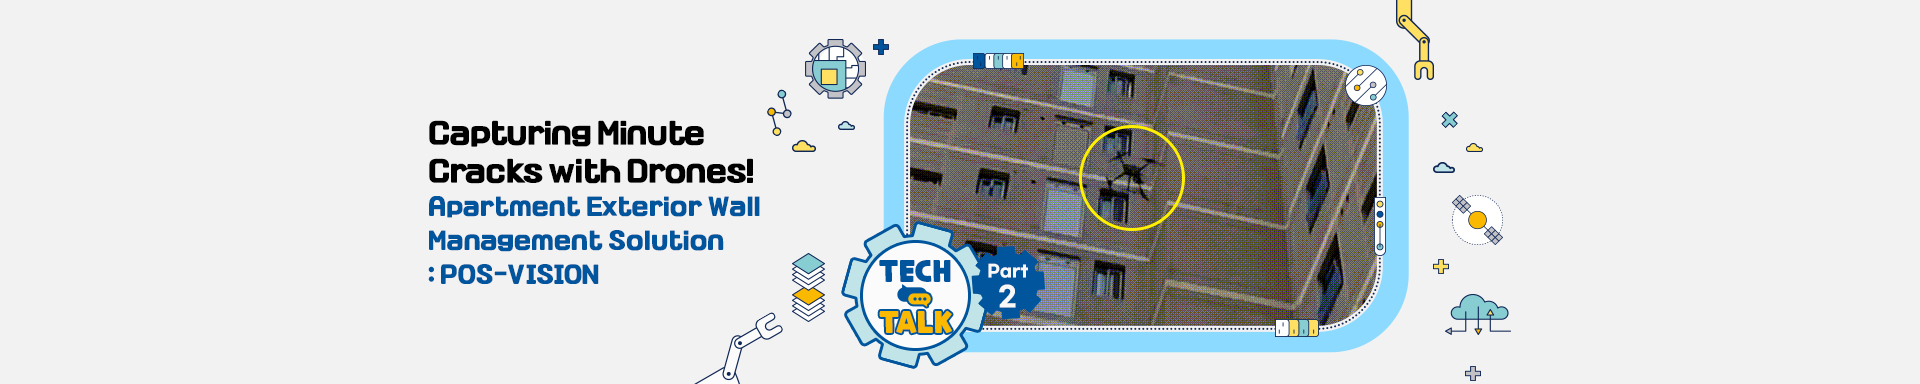 [Tech Talk] Part 2. Capturing Minute Cracks with Drones! Apartment Exterior Wall Management Solution: POS-VISION